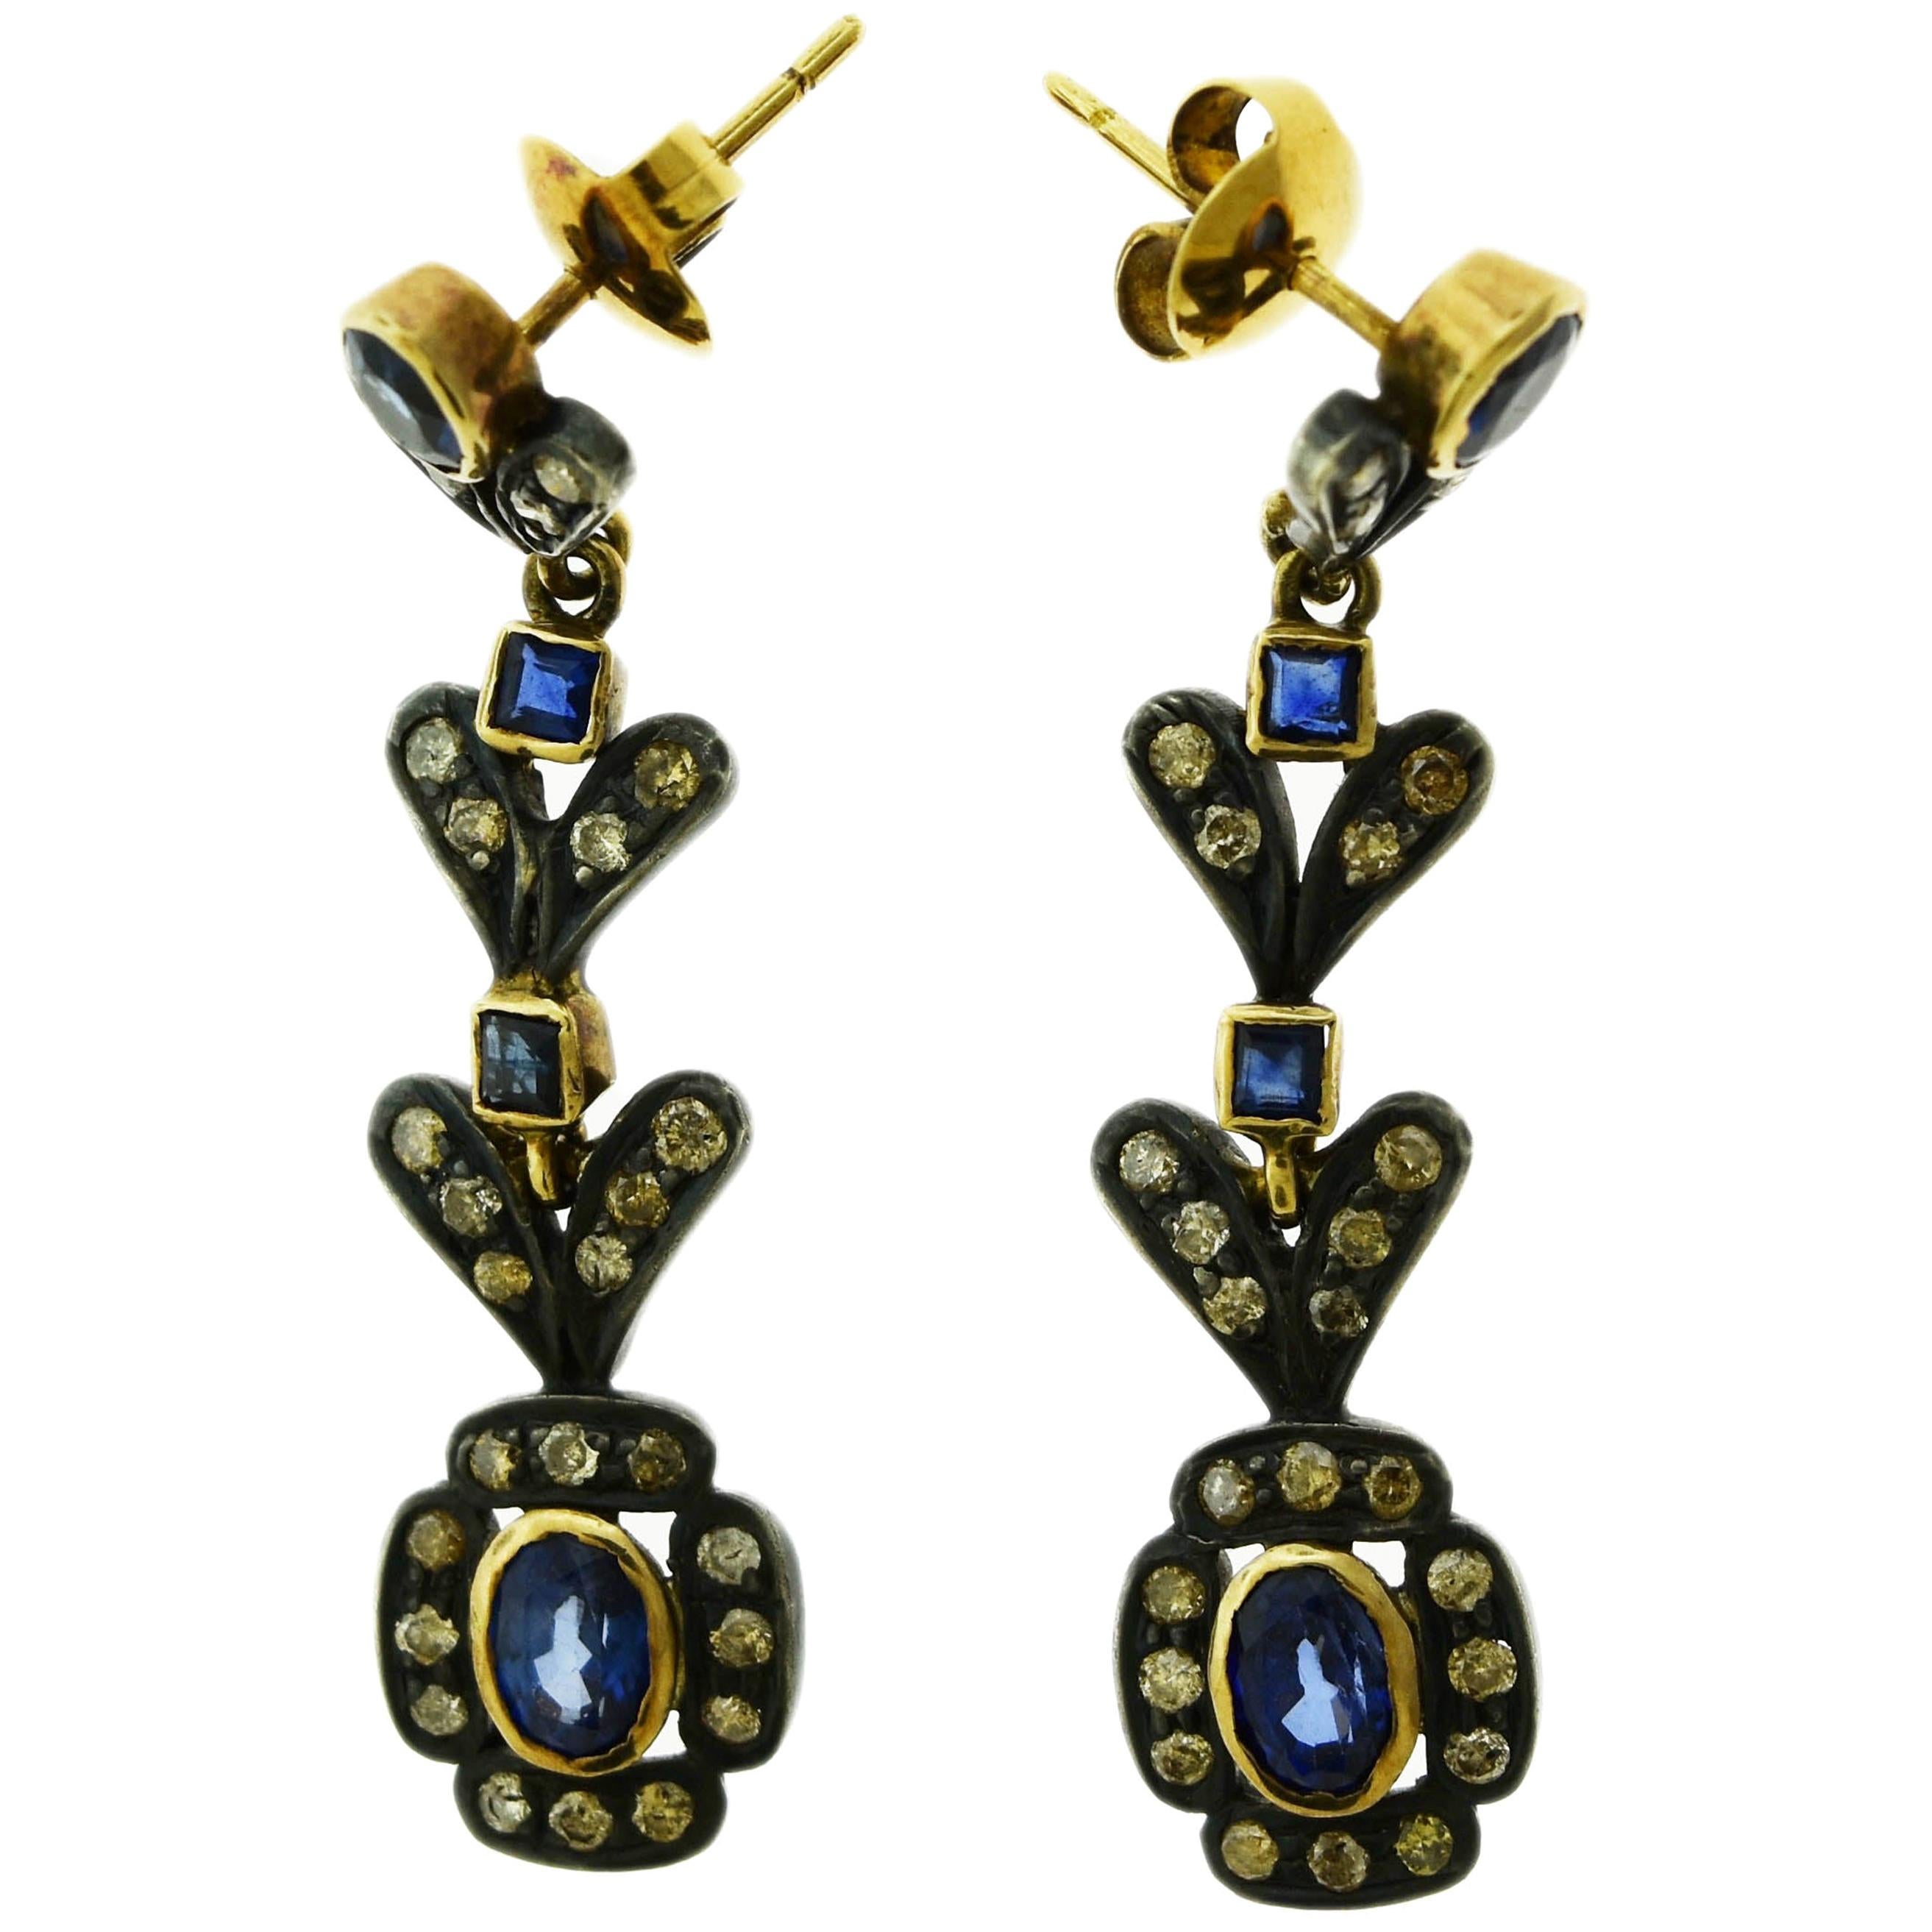 Blue Sapphire and Diamonds Set in 18 Karat Gold with Rodium Antique Earrings